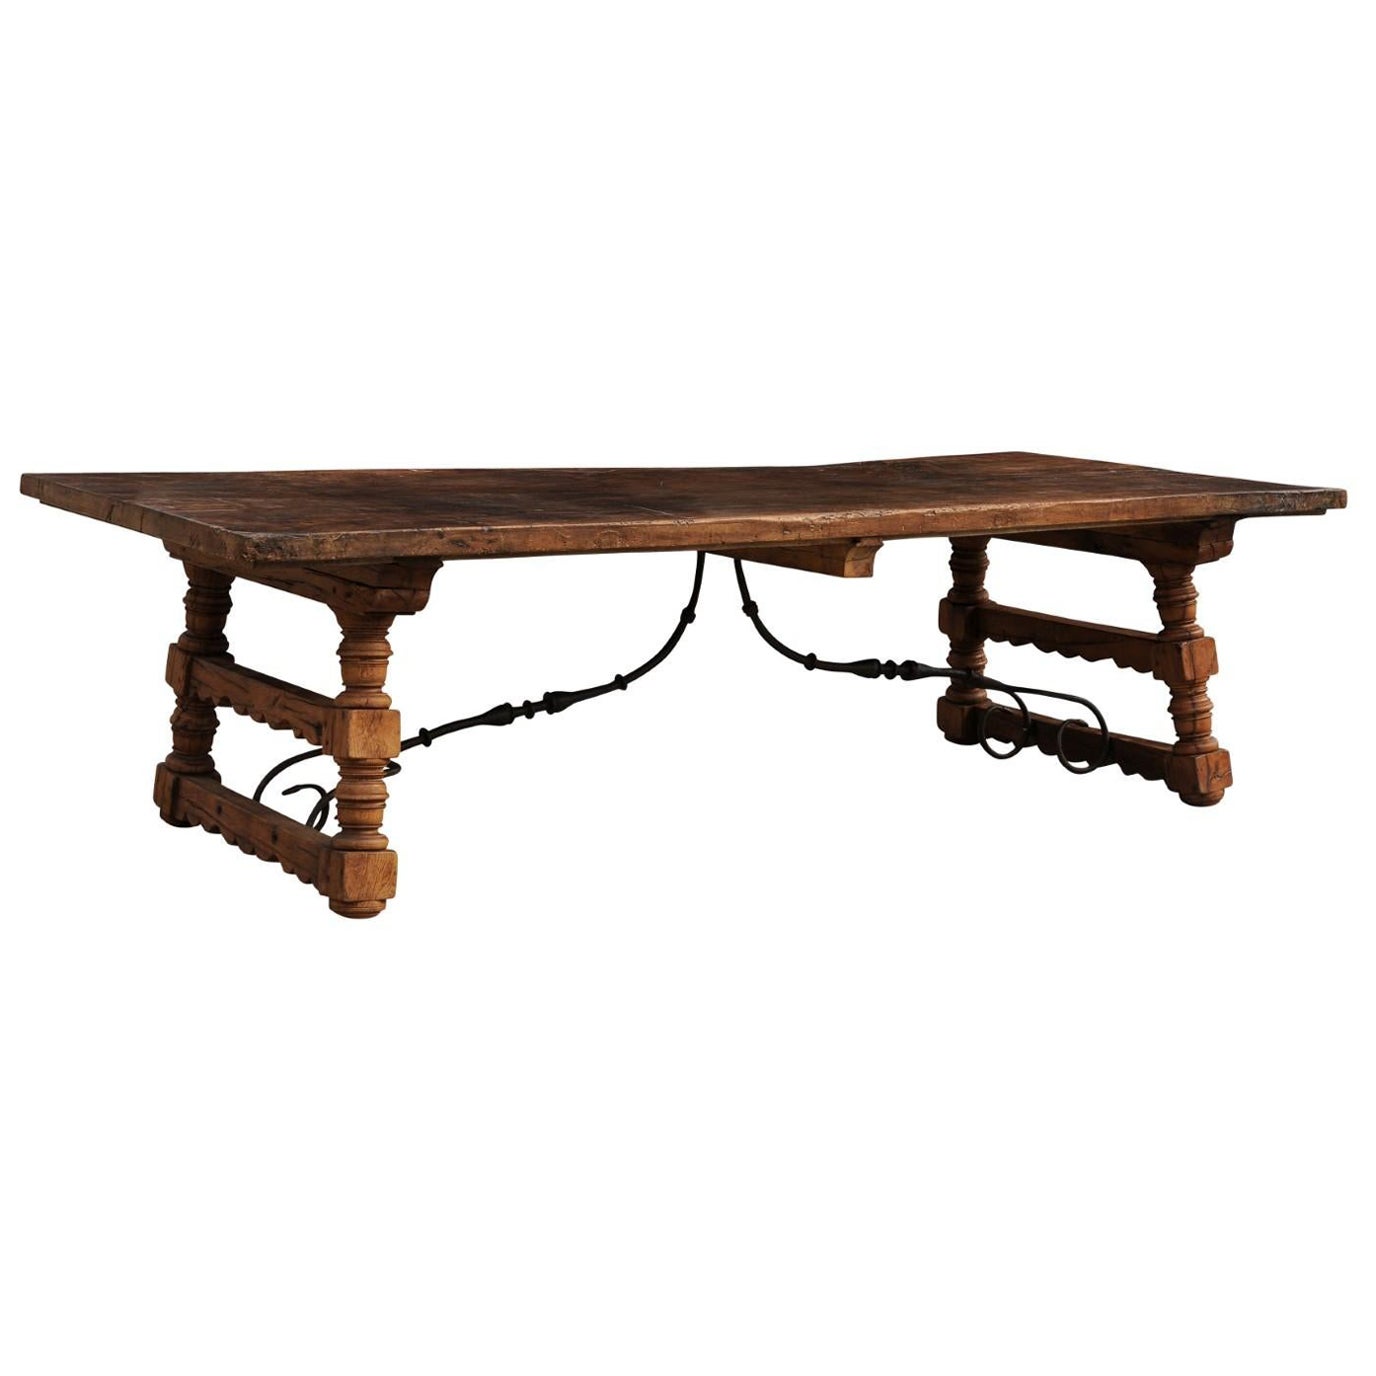 A Robust Italian 9.5 Ft Long Dining Table w/Carved Trestle Legs & Iron Stretcher For Sale